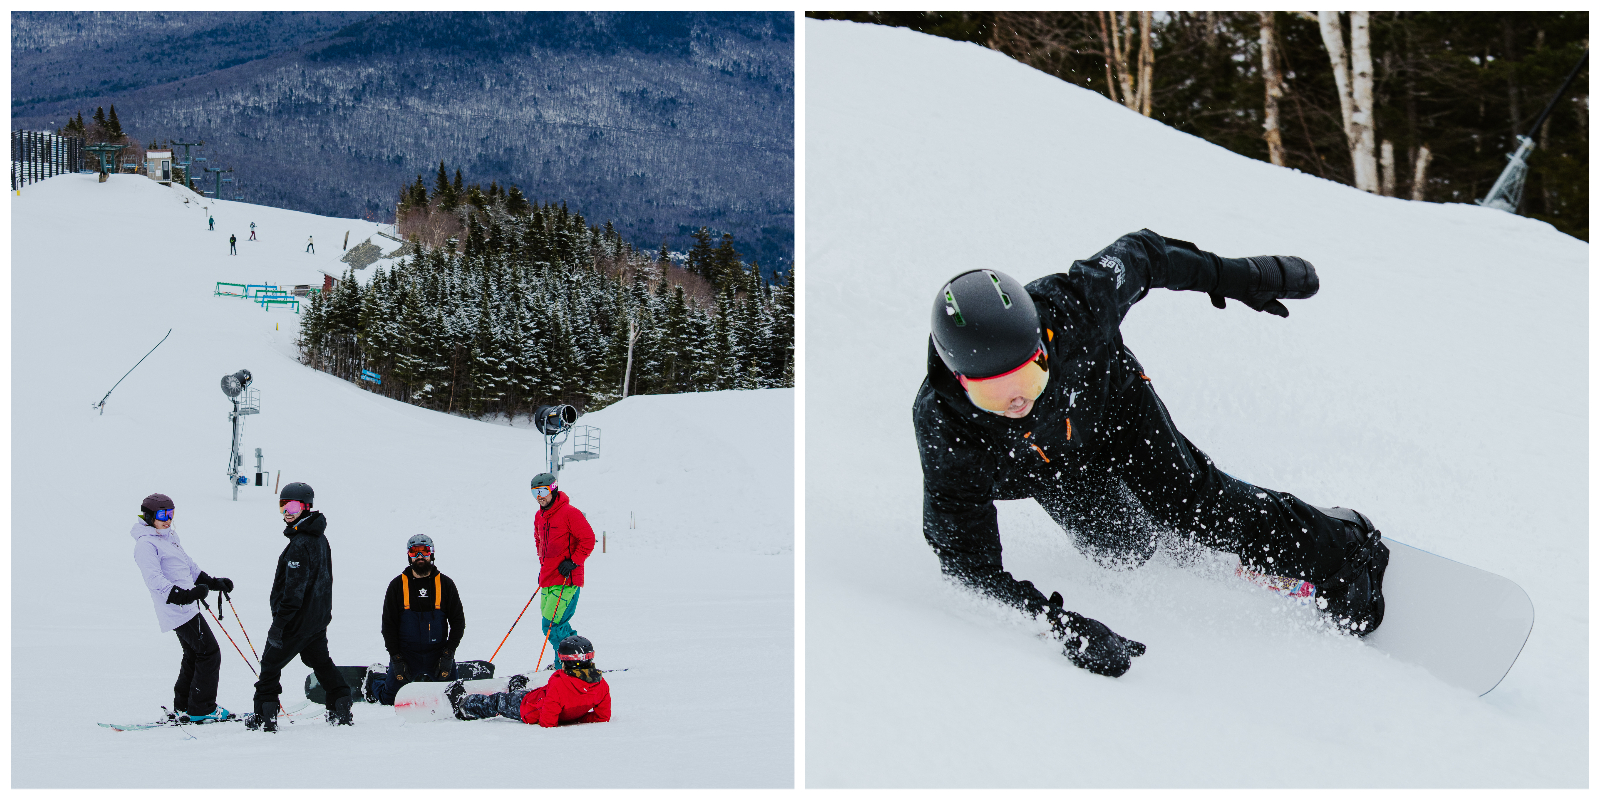 TSM, The Ski Monster, skiing, snowboarding, skis, snowboards, gear test, ski test, winter, snow, Waterville Valley, New Hampshire